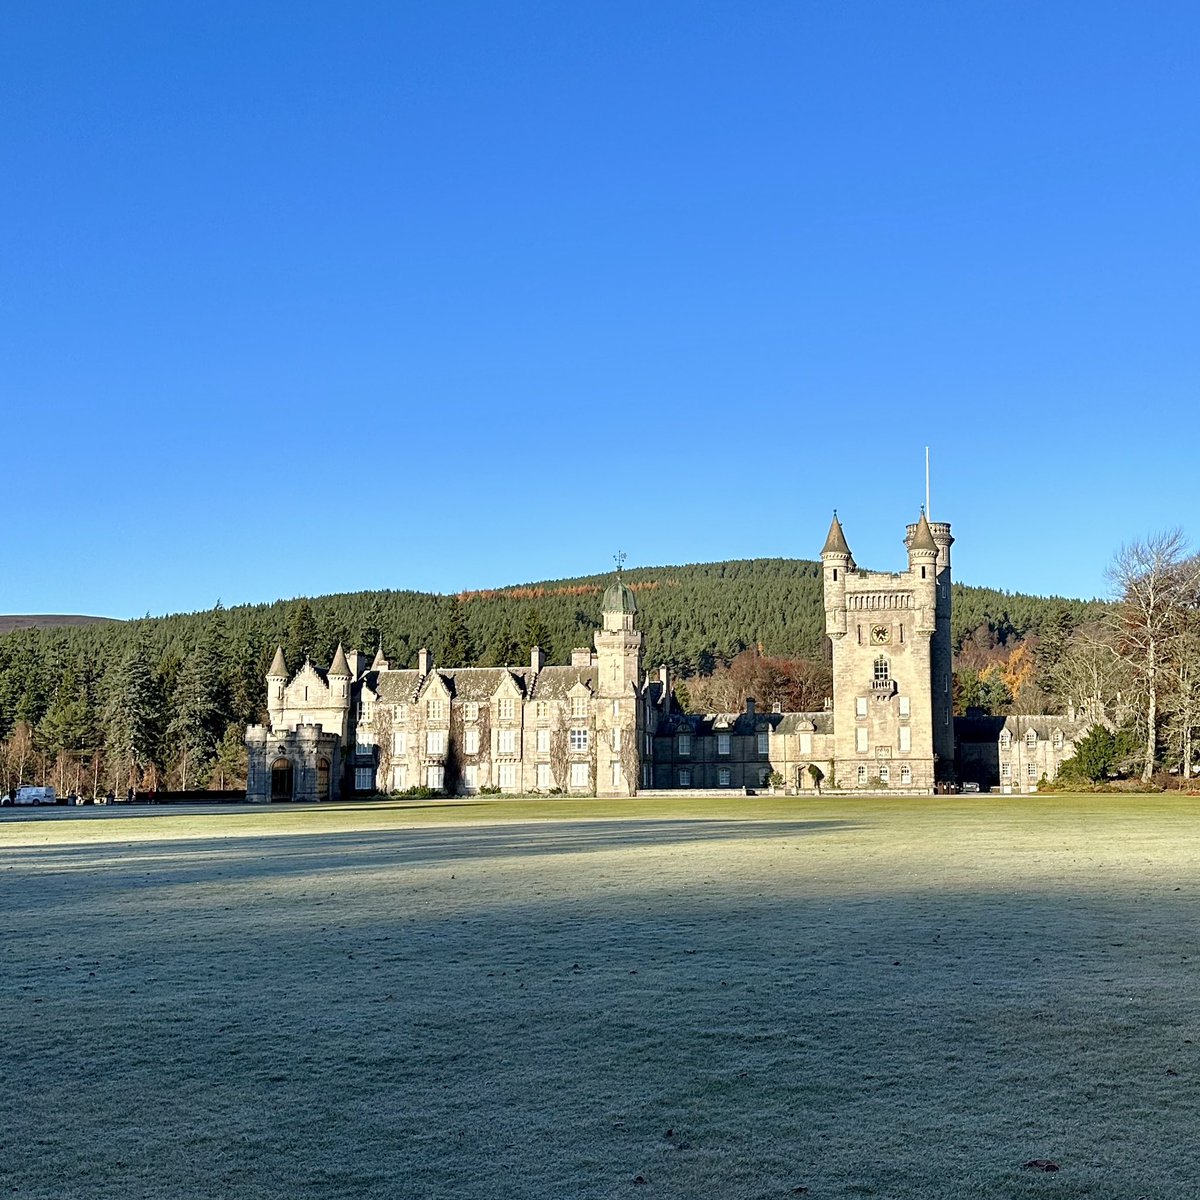 It was a frosty and beautiful start to the day at Balmoral. ❄️